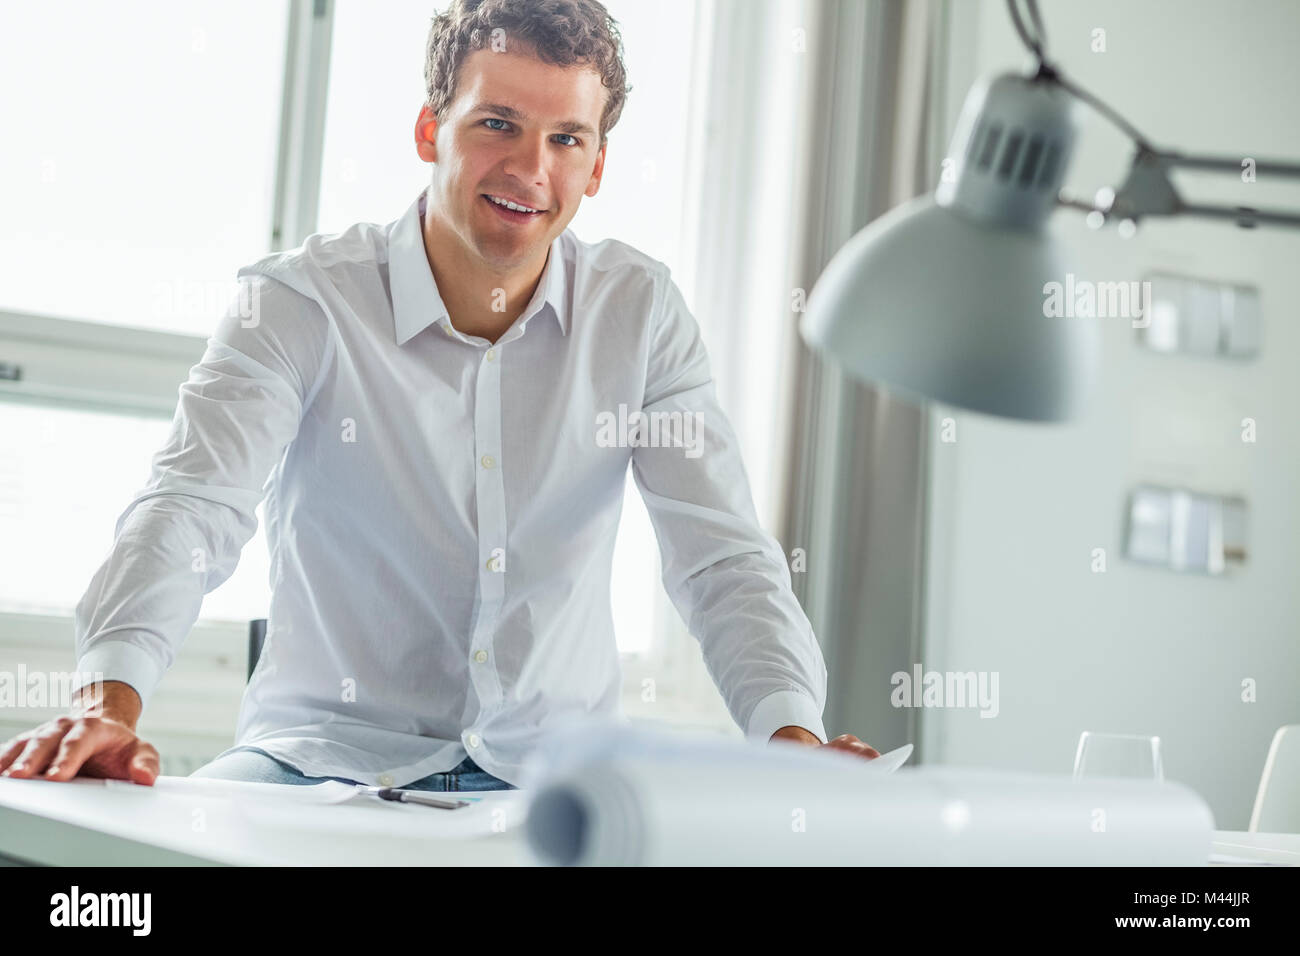 Portrait of confident young businessman sitting at desk in office Stock Photo